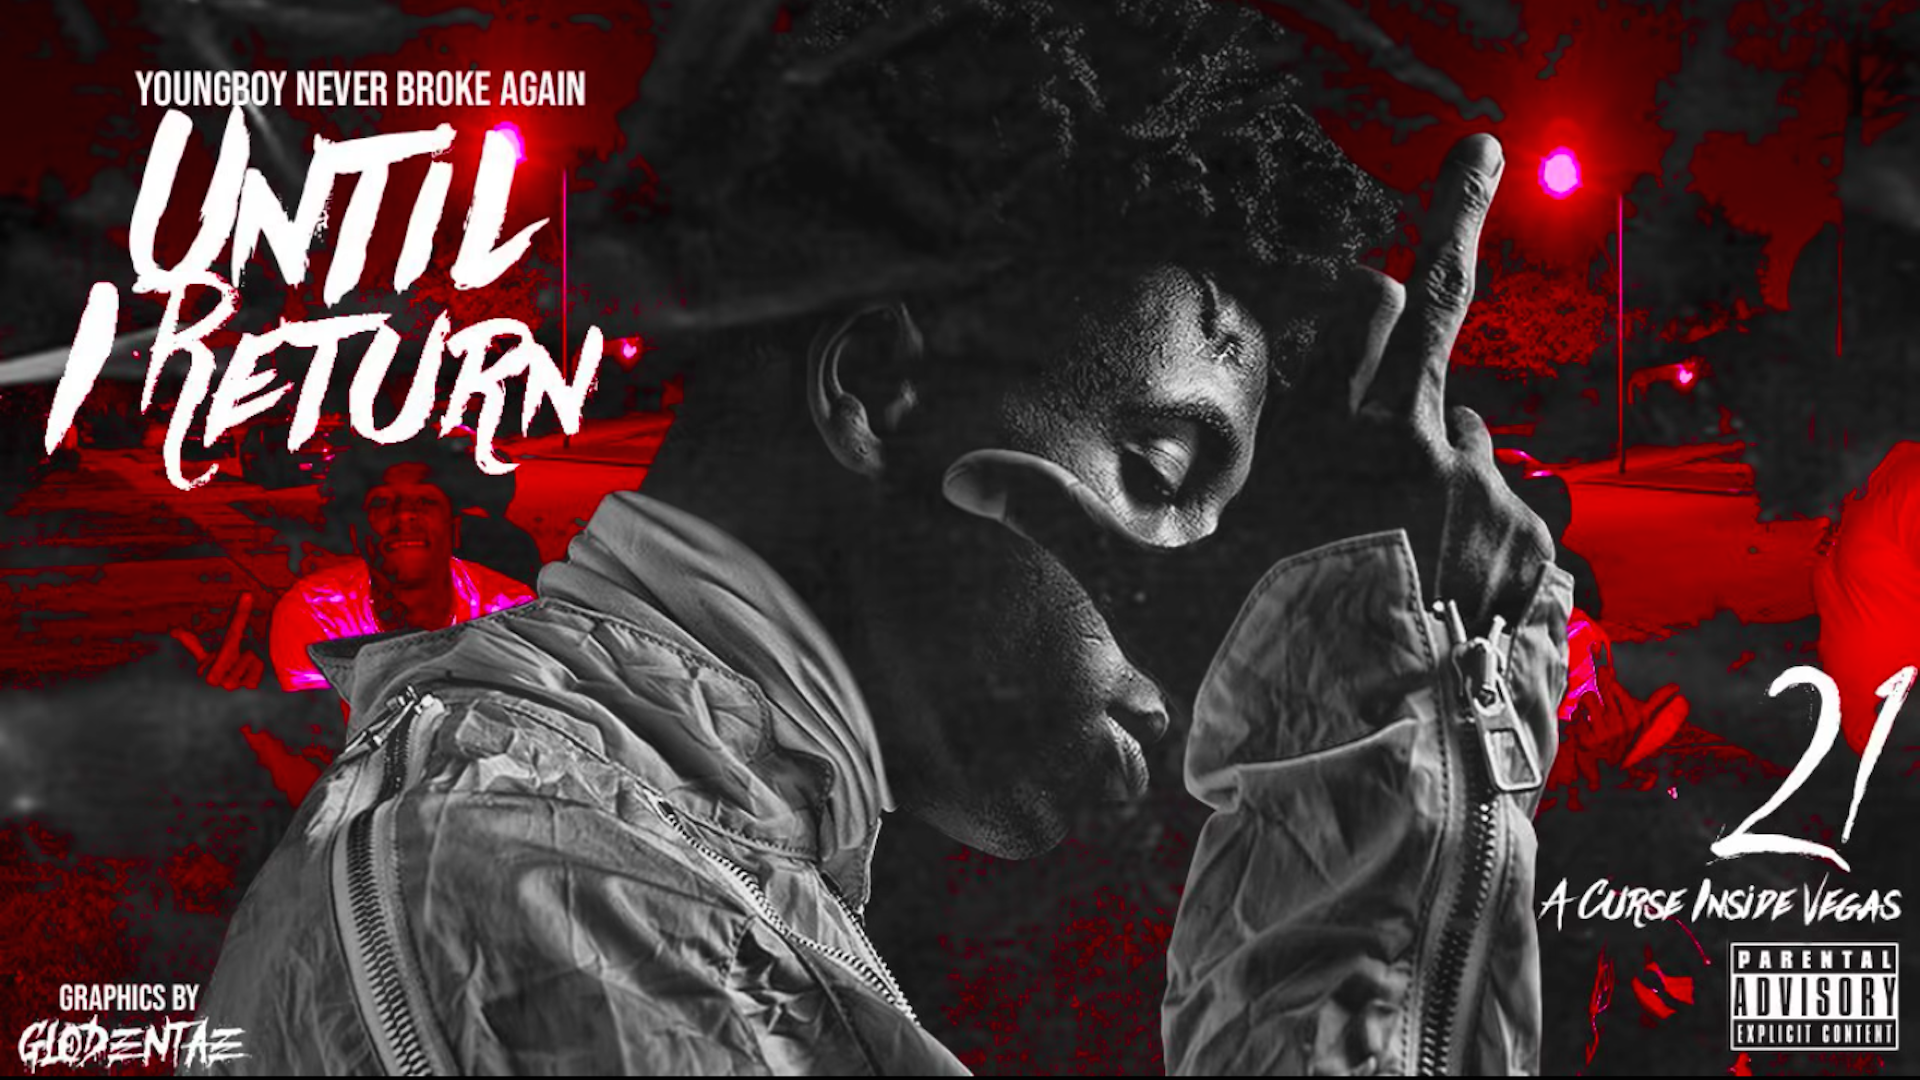 Listen to YoungBoy Never Broke Again's New Mixtape 'Until I Return'